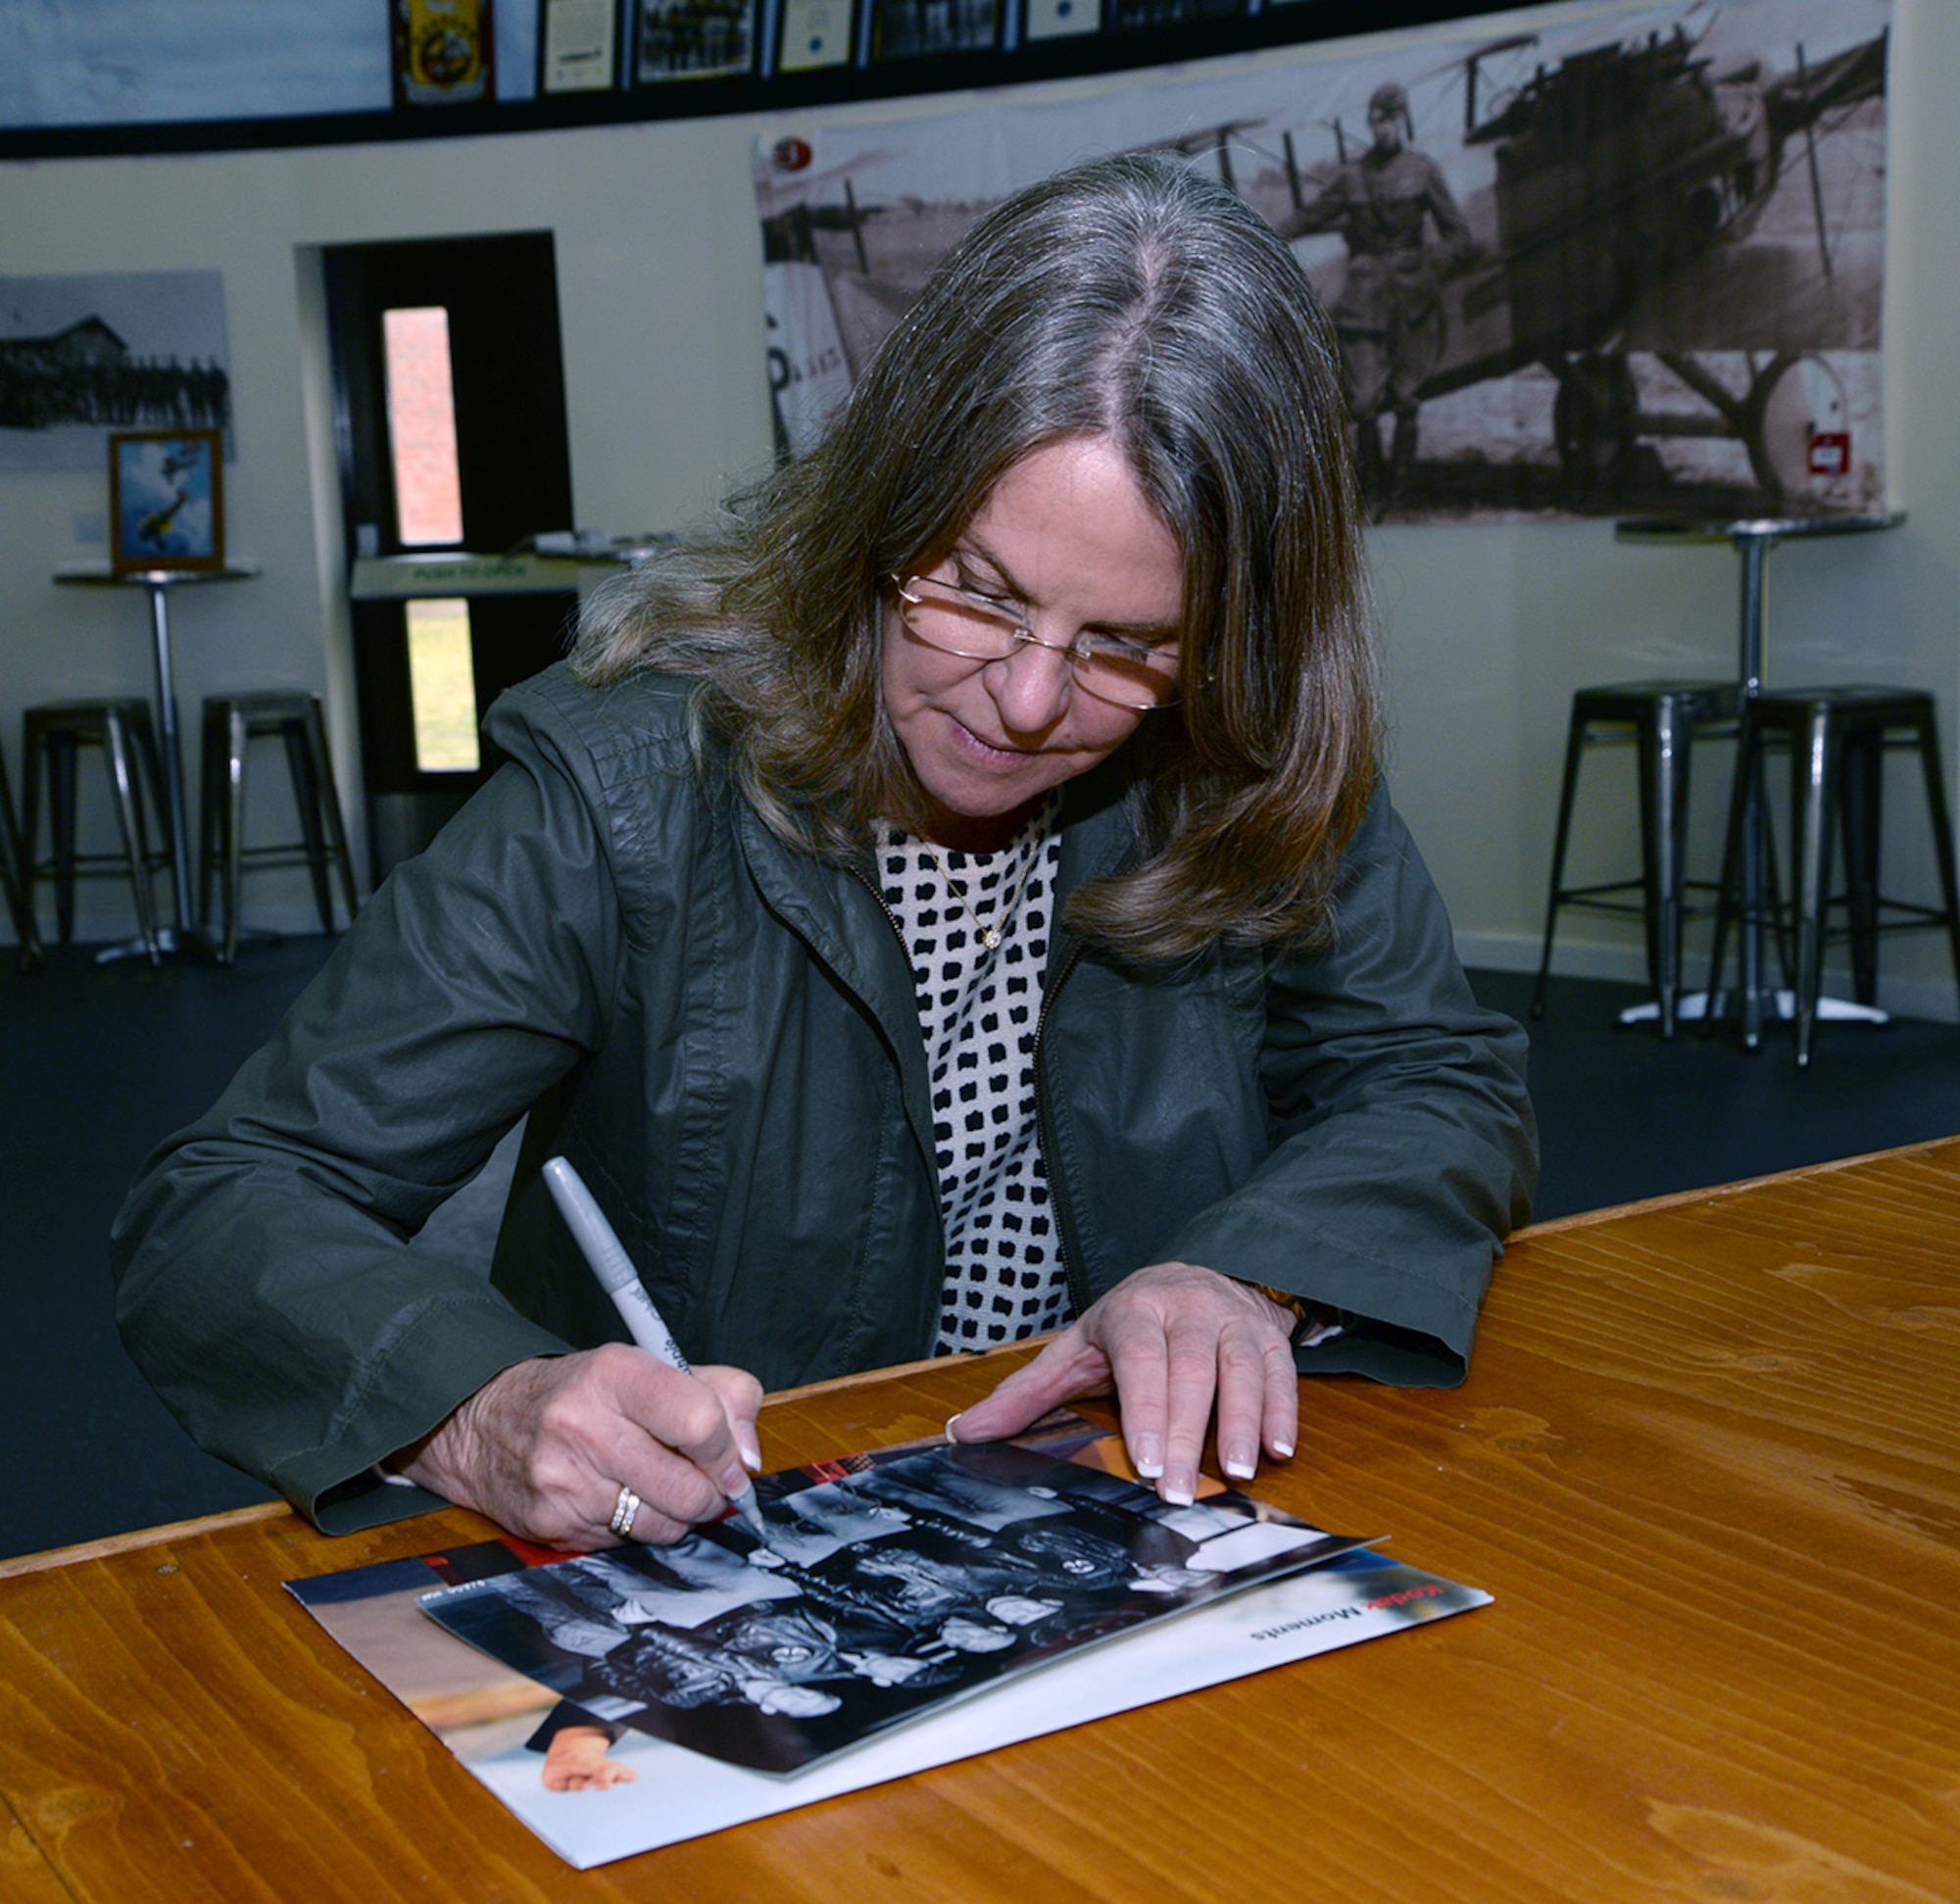 Jonna Doolittle Hoppes, granddaughter of Gen. James Harold “Jimmy” Doolittle, American aviation pioneer and retired lieutenant general in the U.S. Army Air Corps, signs a photo of her grandfather and some of his crew during a visit to the 95th Reconnaissance Squadron Heritage Hub. On April 18, 1942, then-Lt. Col. Doolittle led the daylight air raid on Tokyo after the Japanese attacked Pearl Harbor. His crew on that mission became known as the “Doolittle Raiders.” Hoppes visited RAF Mildenhall along with former World War II bases in East Anglia during the 100th Bomb Group Foundation visit to celebrate the 75th anniversary of the 100th Bomb Group. During World War II, six of the 16 Doolittle Raiders’ crew were from the 95th Bomb Squadron. The 95th BS was redesignated the 95th RS in 1982. (U.S. Air Force photo by Karen Abeyasekere)